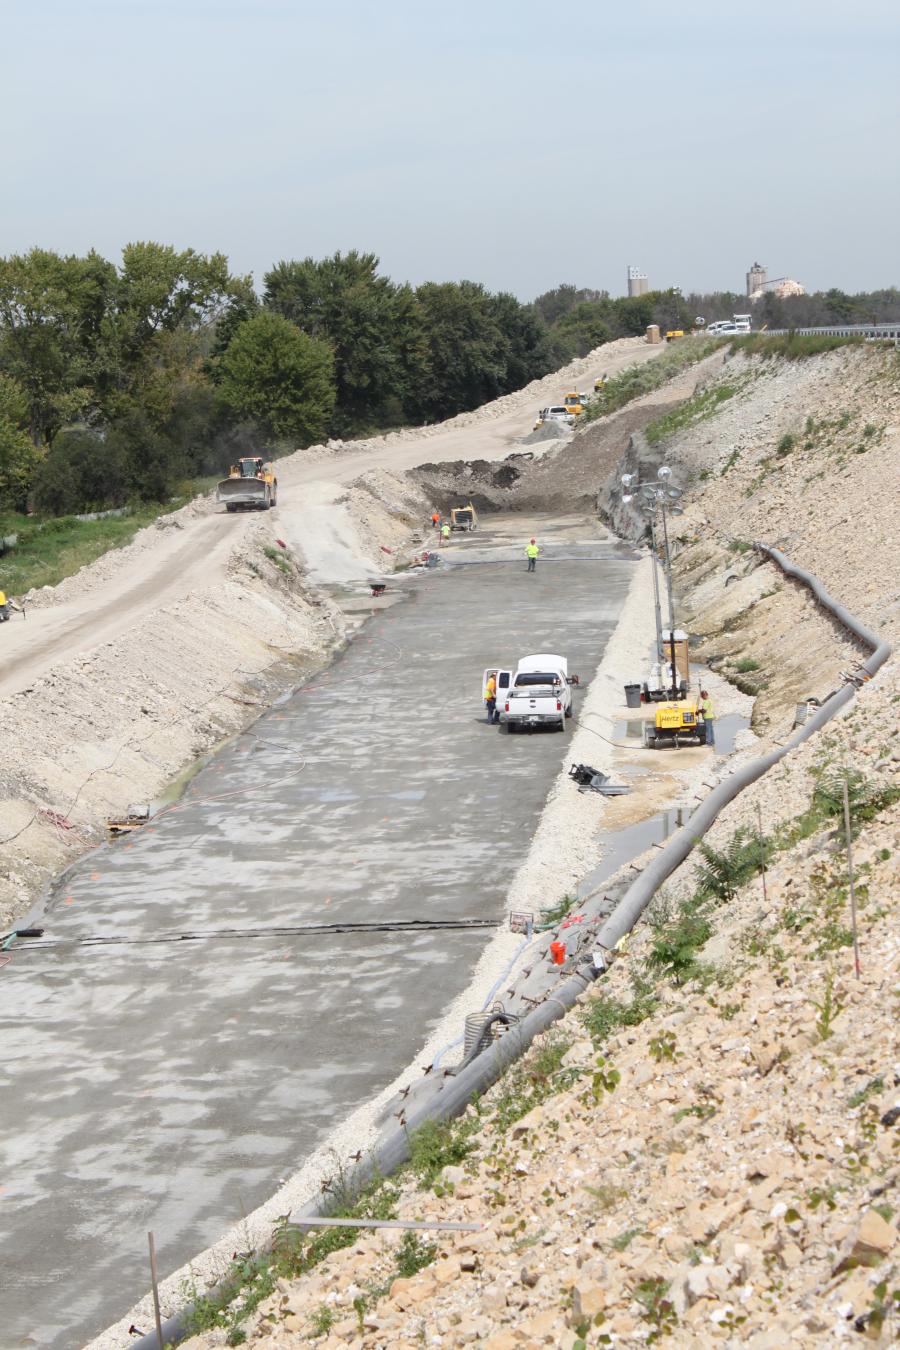 The U.S. Army Corps of Engineers (USACE) $150 million Lockport Lock and Dam, Upper Pool project is nearing completion as crews from ASI Constructors Inc. are working hard to deliver the final phase of the project.